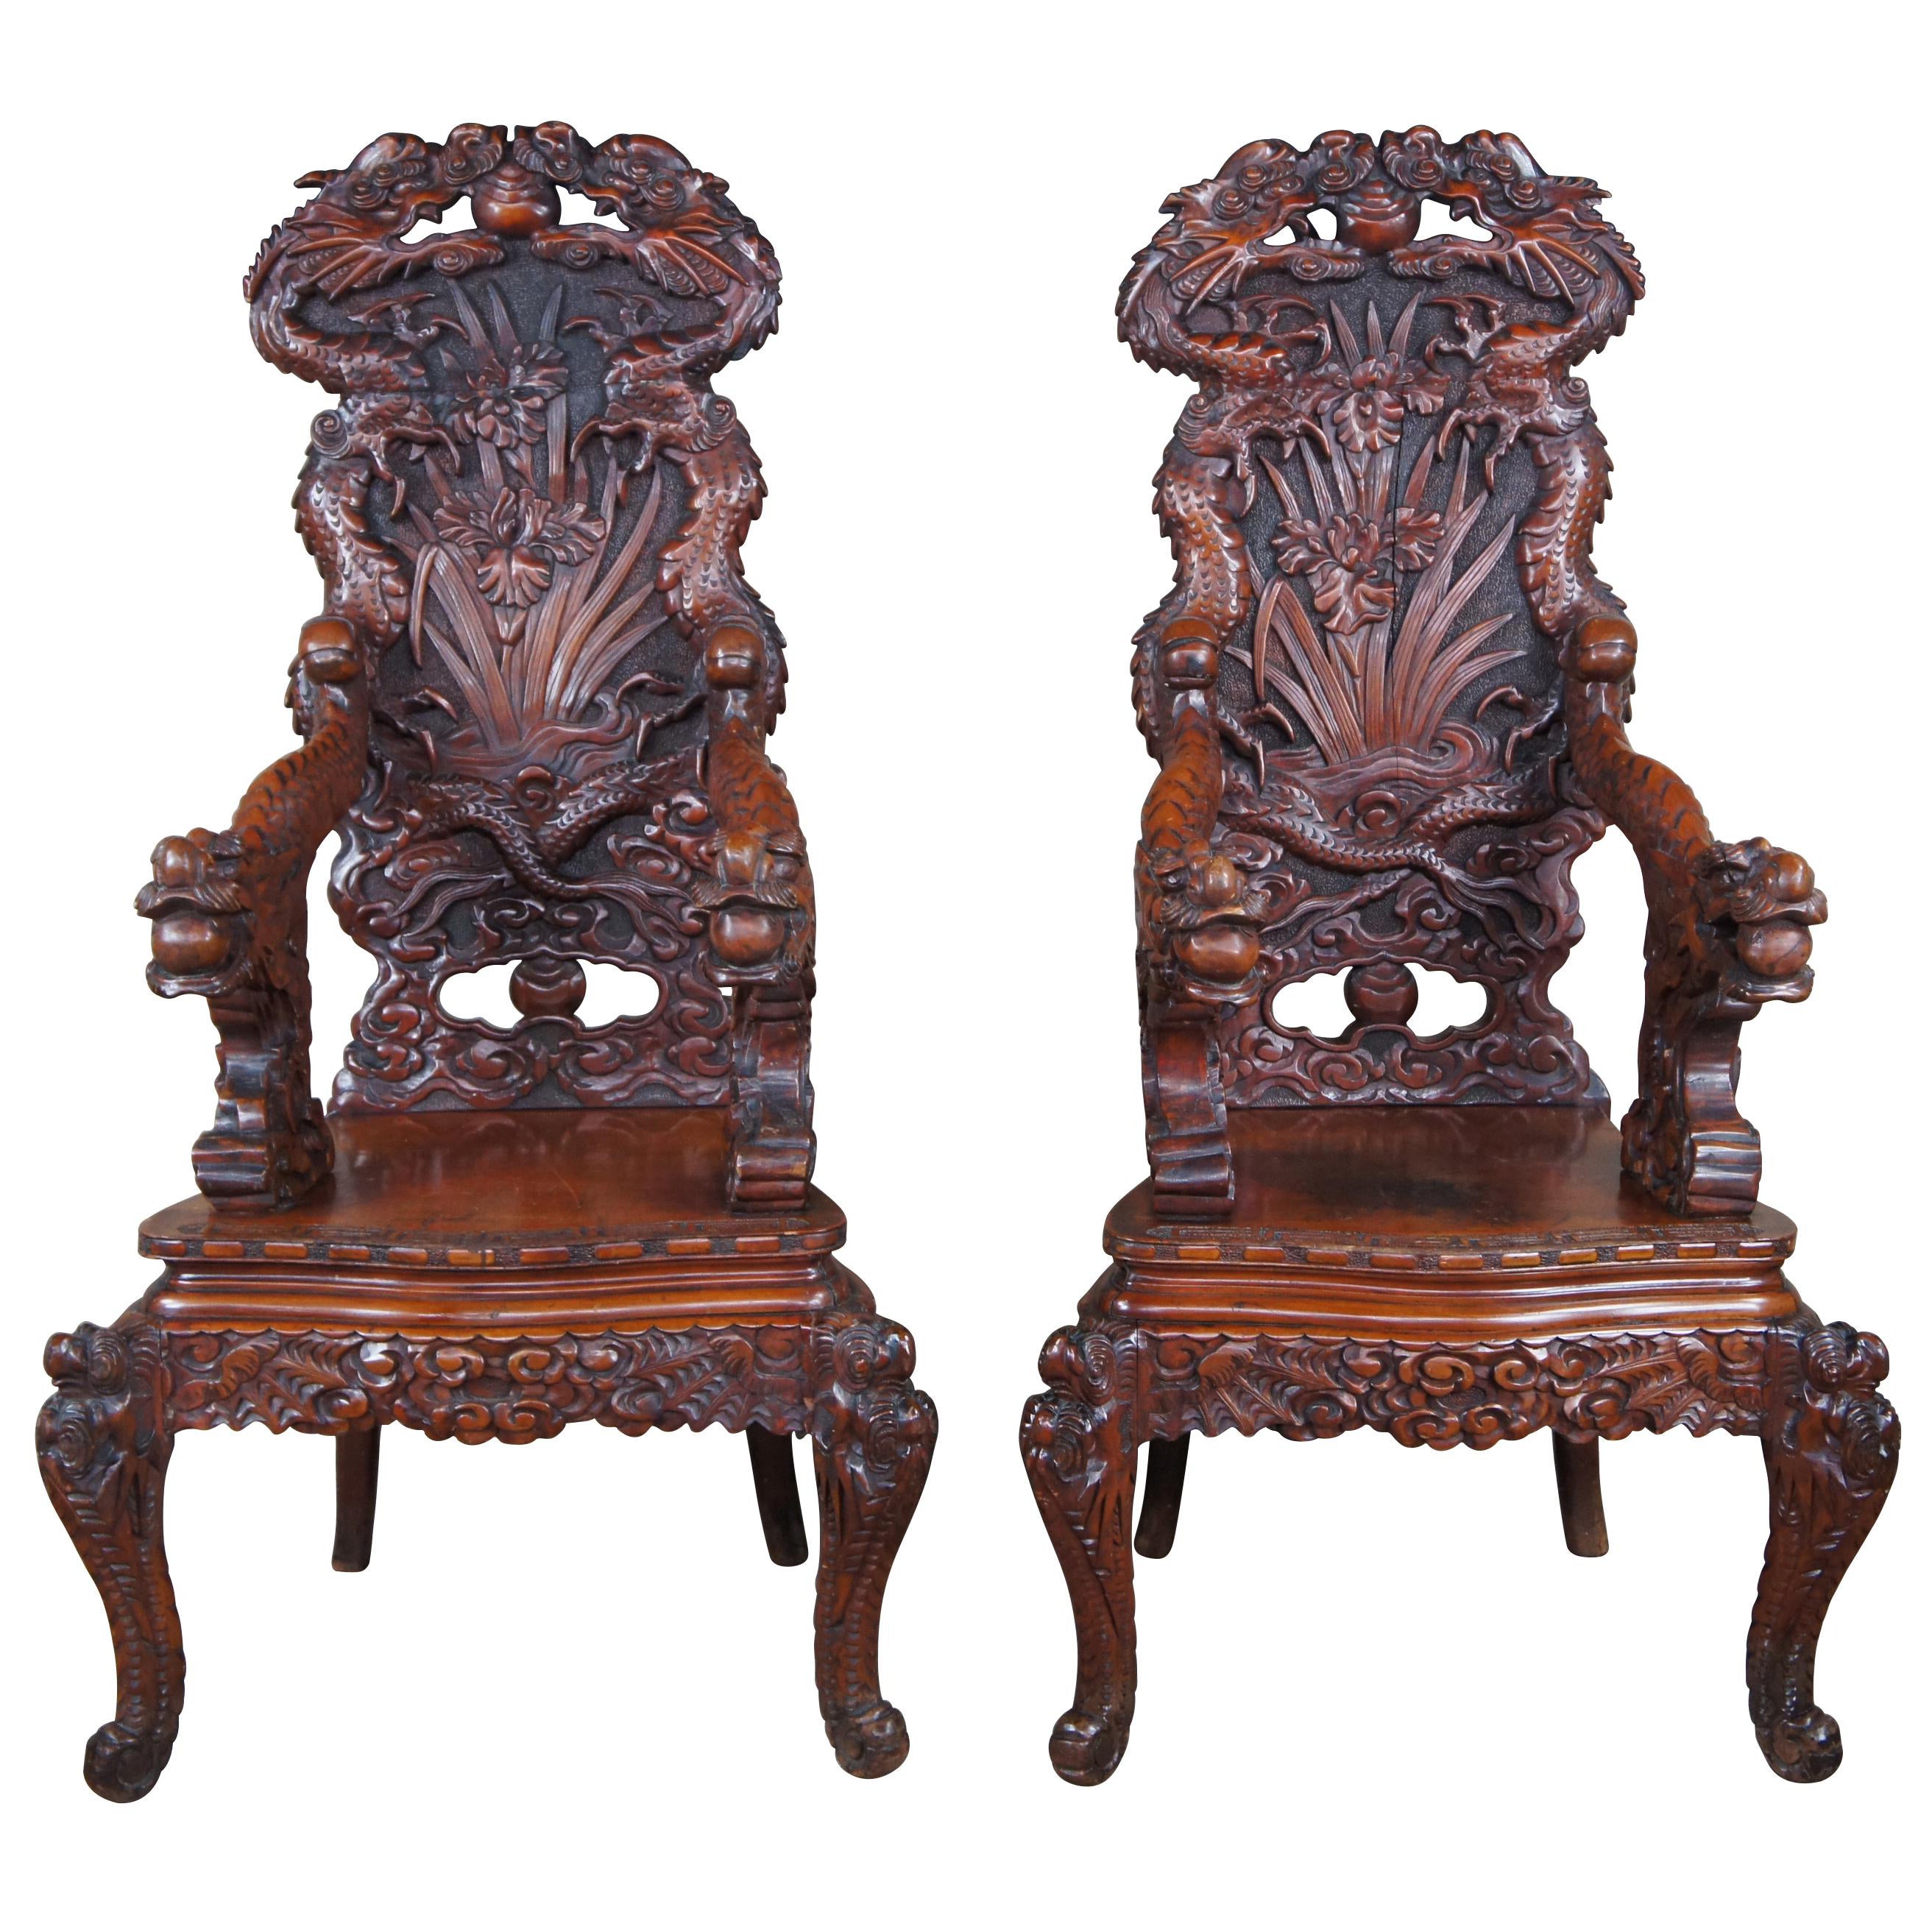 2 Antique Japanese Imperial Meiji Elm High Relief Carved Dragon Throne Armchair